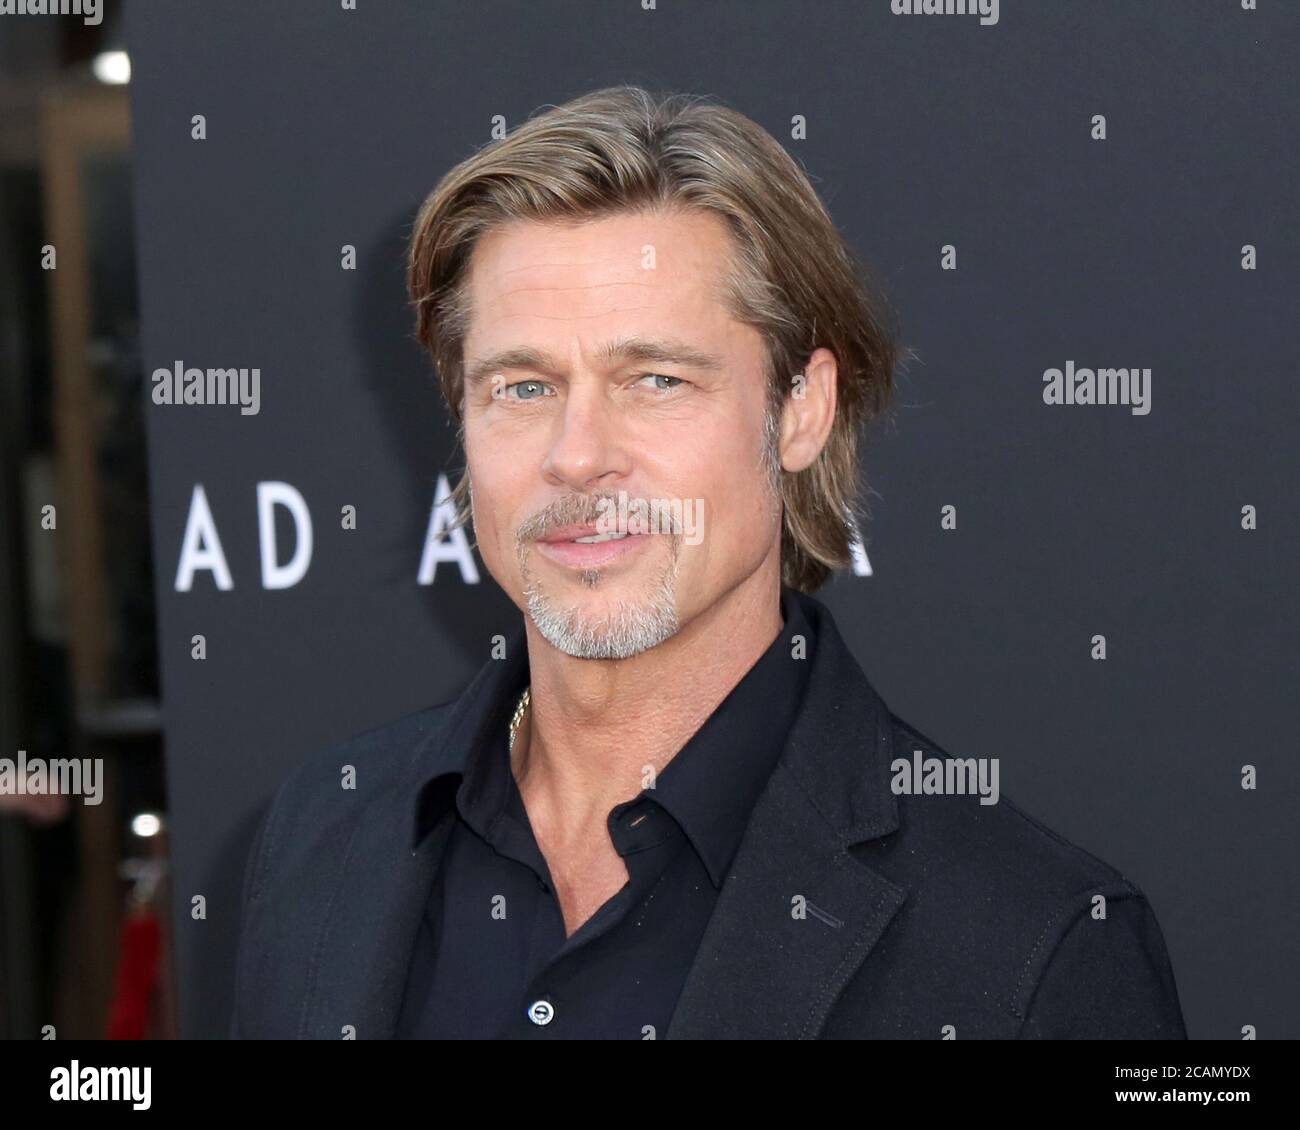 LOS ANGELES - SEP 18:  Brad Pitt at the 'Ad Astra' LA Premiere at the Arclight Hollywood on September 18, 2019 in Los Angeles, CA Stock Photo